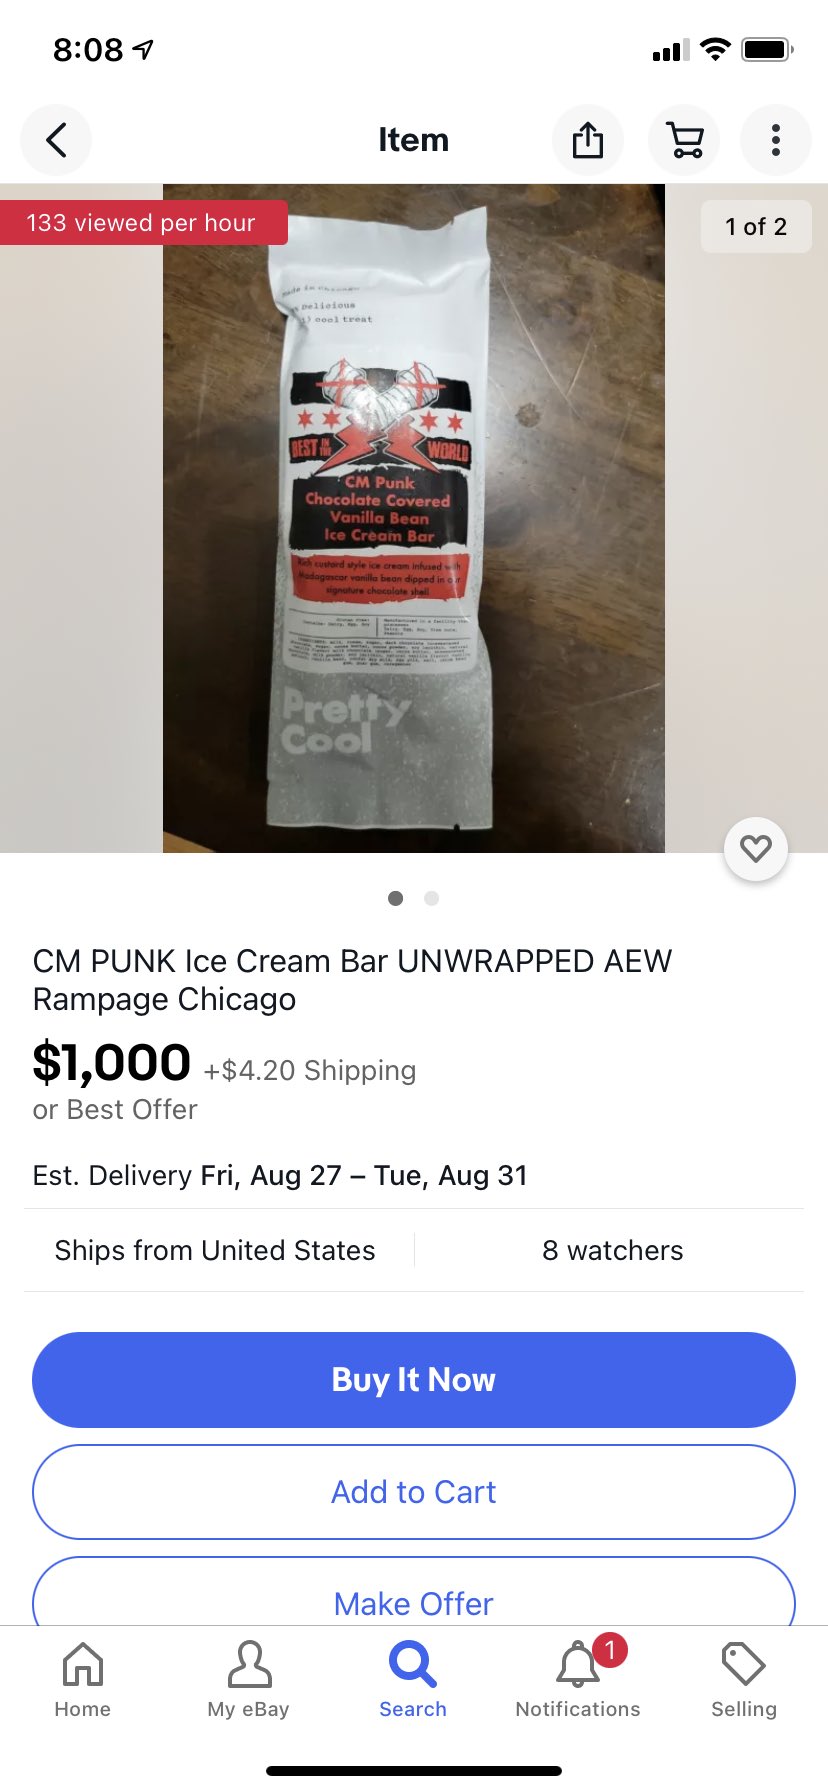 ron Rift Of Nodq Com People Are Putting Cm Punk Ice Cream Bar Wrappers From Aewrampage For Sale On Ebay Thanks To Badfeet3 T Co Igmpgi9umf Aew Twitter